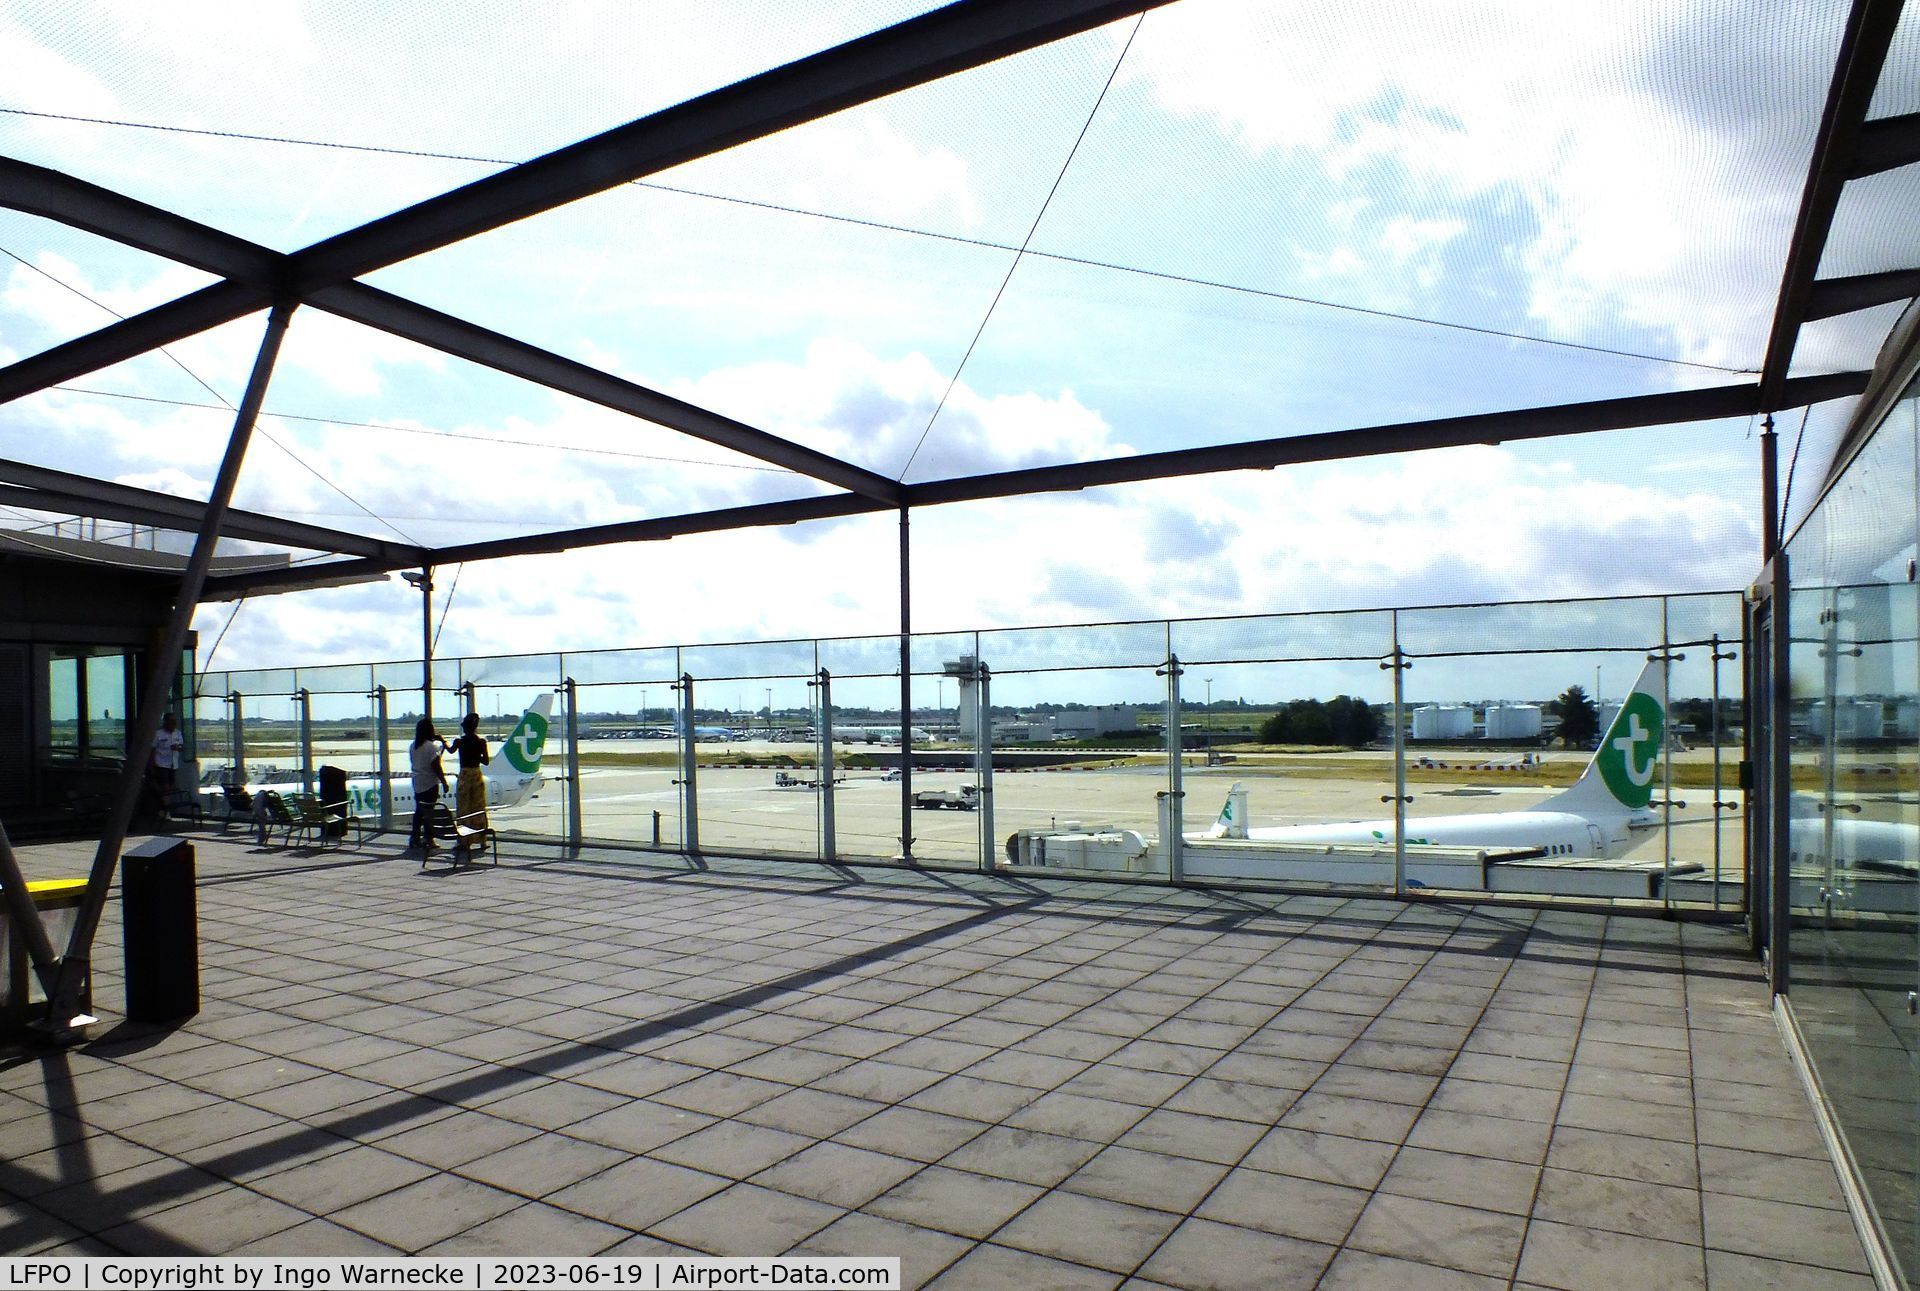 Paris Orly Airport, Orly (near Paris) France (LFPO) - the new smaller visitor's terrace at Paris/Orly airport